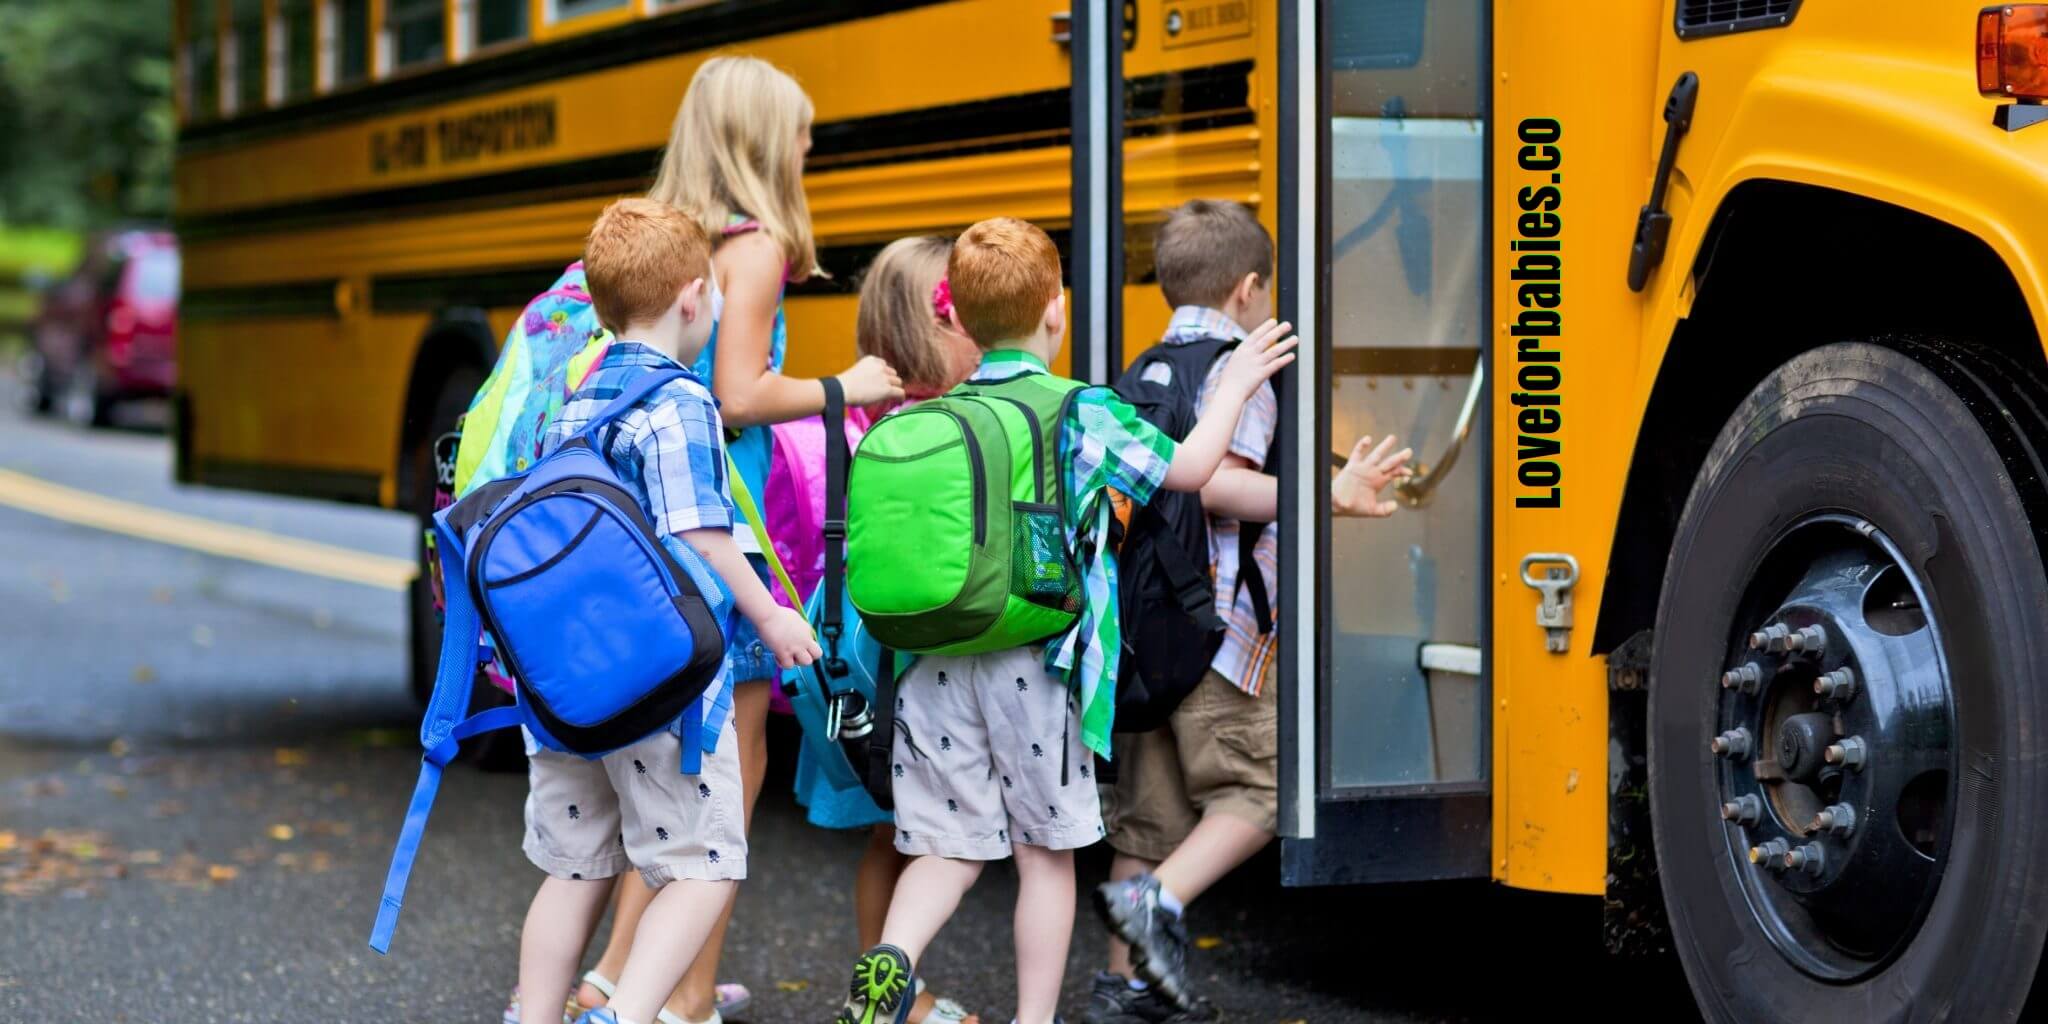 How Do Working Parents Pick Up Kids from School?